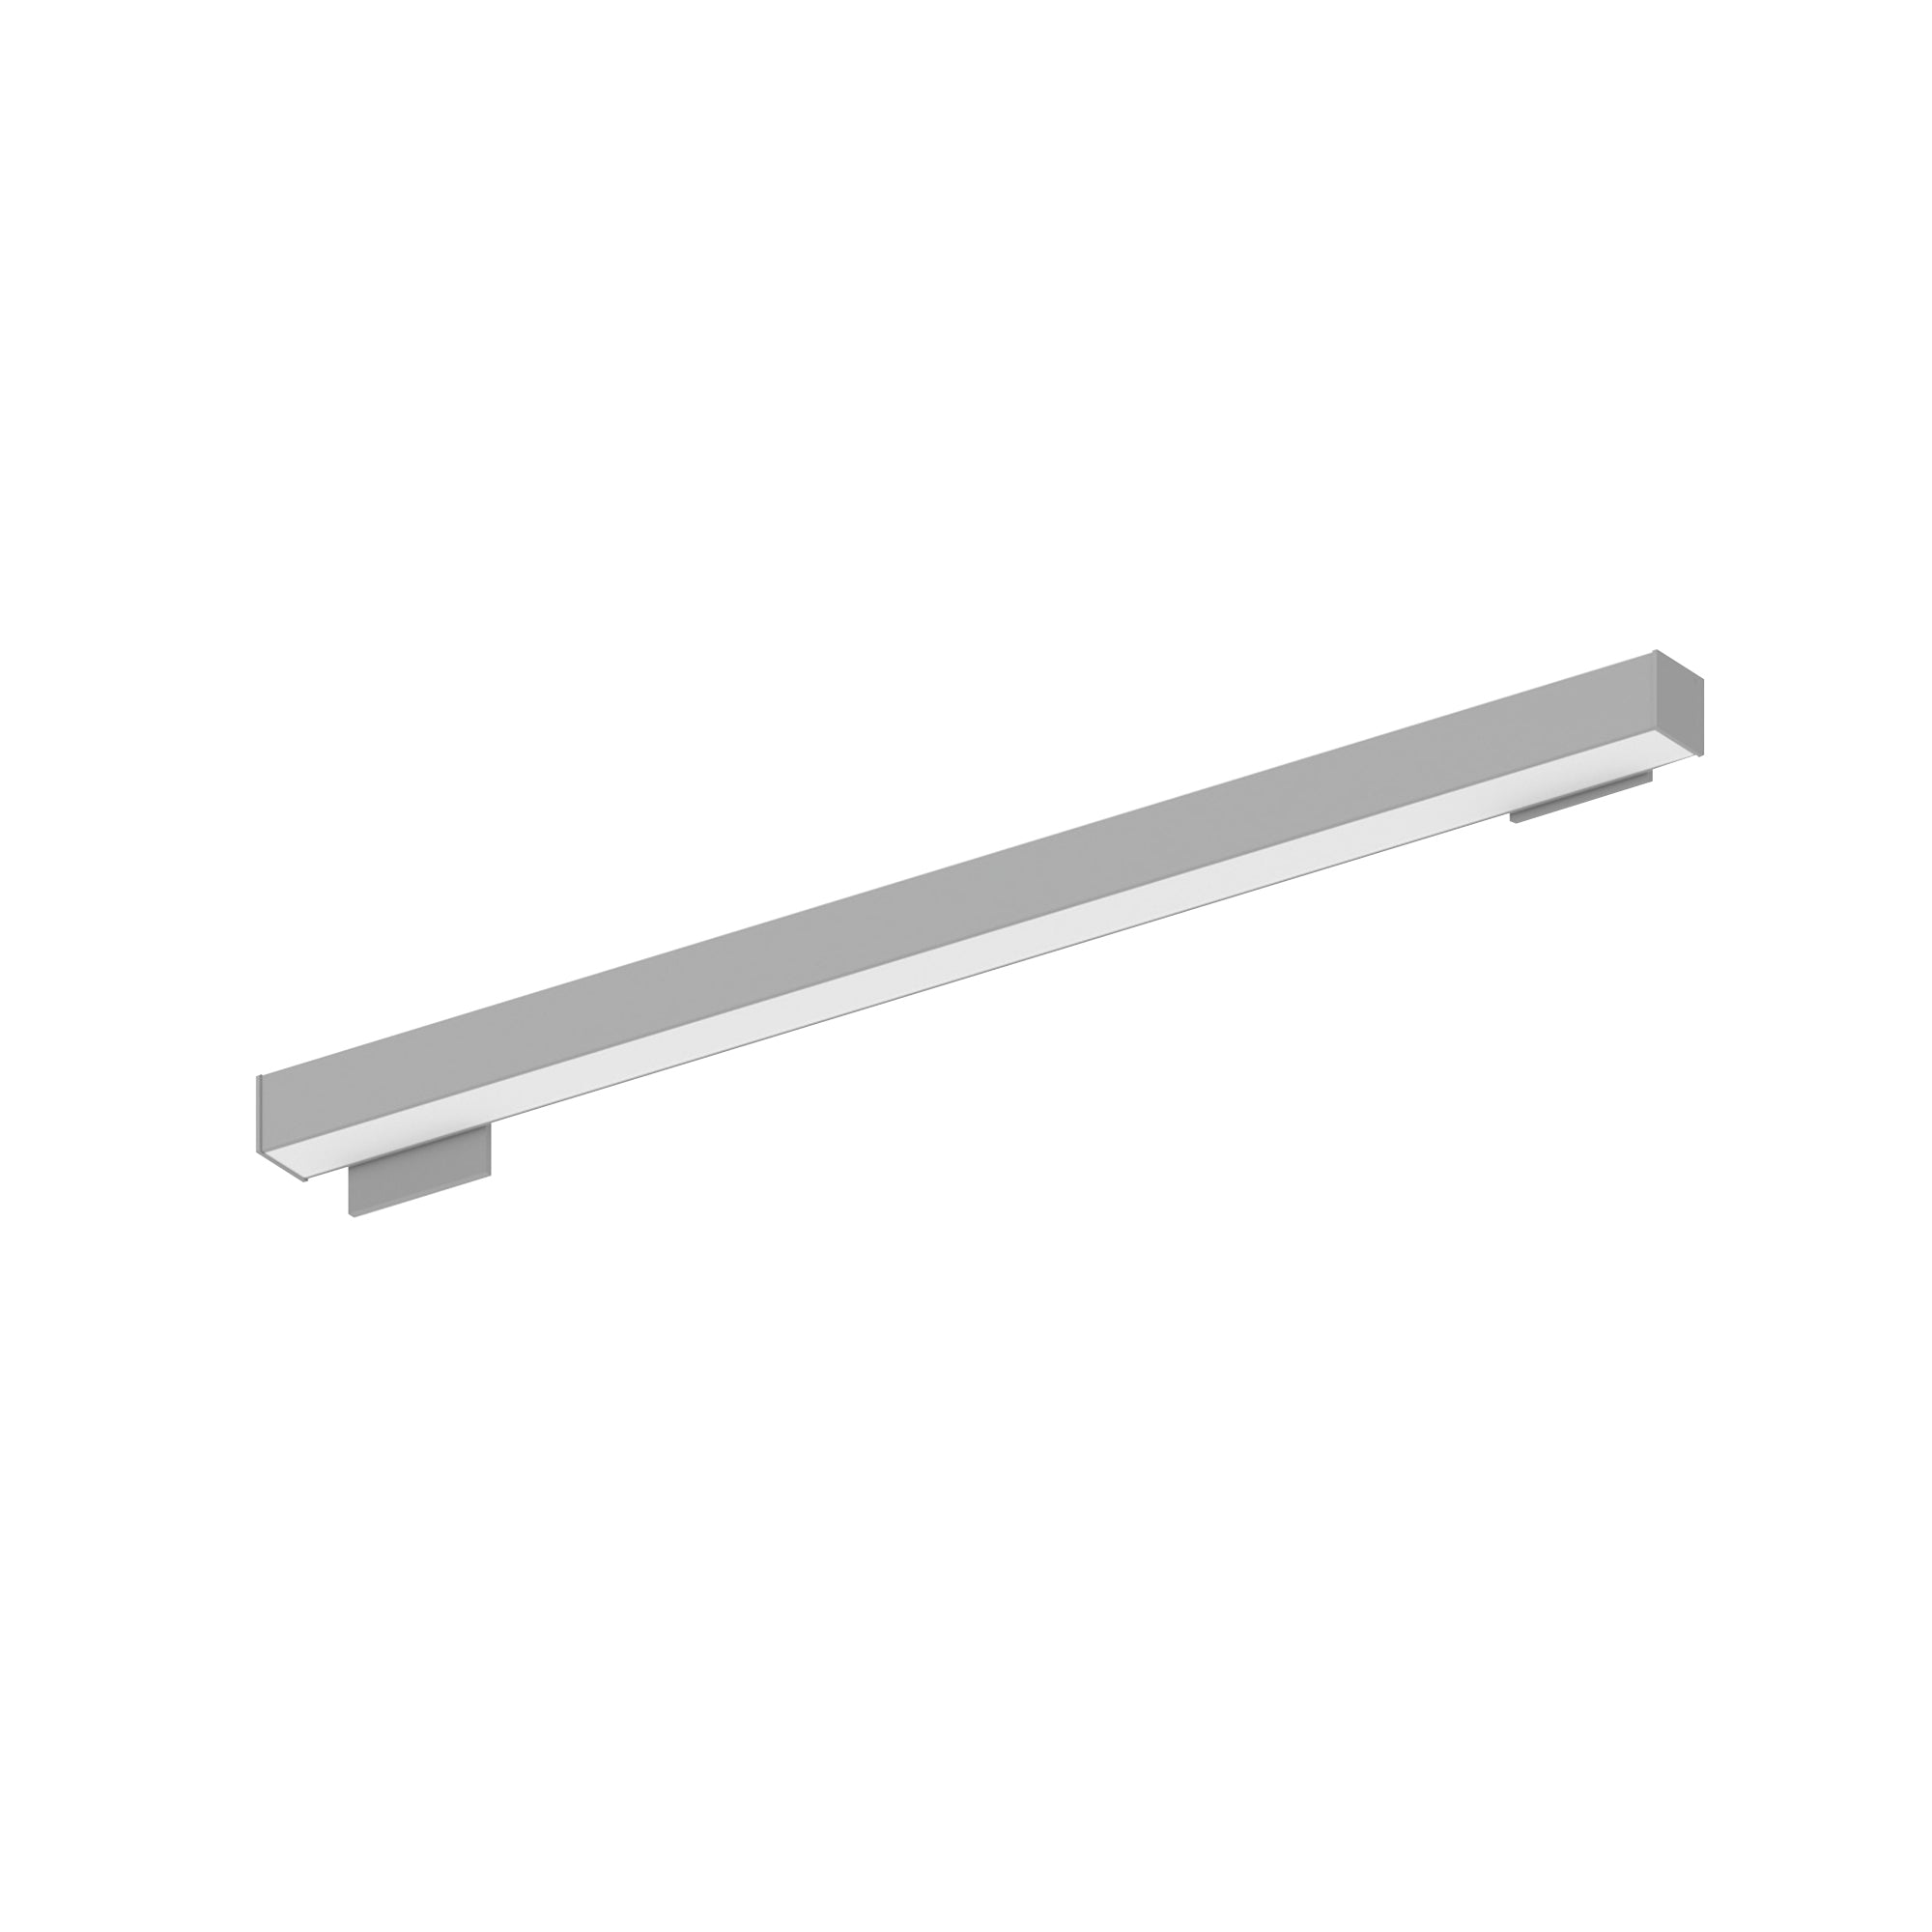 Nora Lighting NWLIN-41040A/L4P-R2 - Linear - 4' L-Line LED Wall Mount Linear, 4200lm / 4000K, 4 Inchx4 Inch Left Plate & 2 Inchx4 Inch Right Plate, Left Power Feed, Aluminum Finish